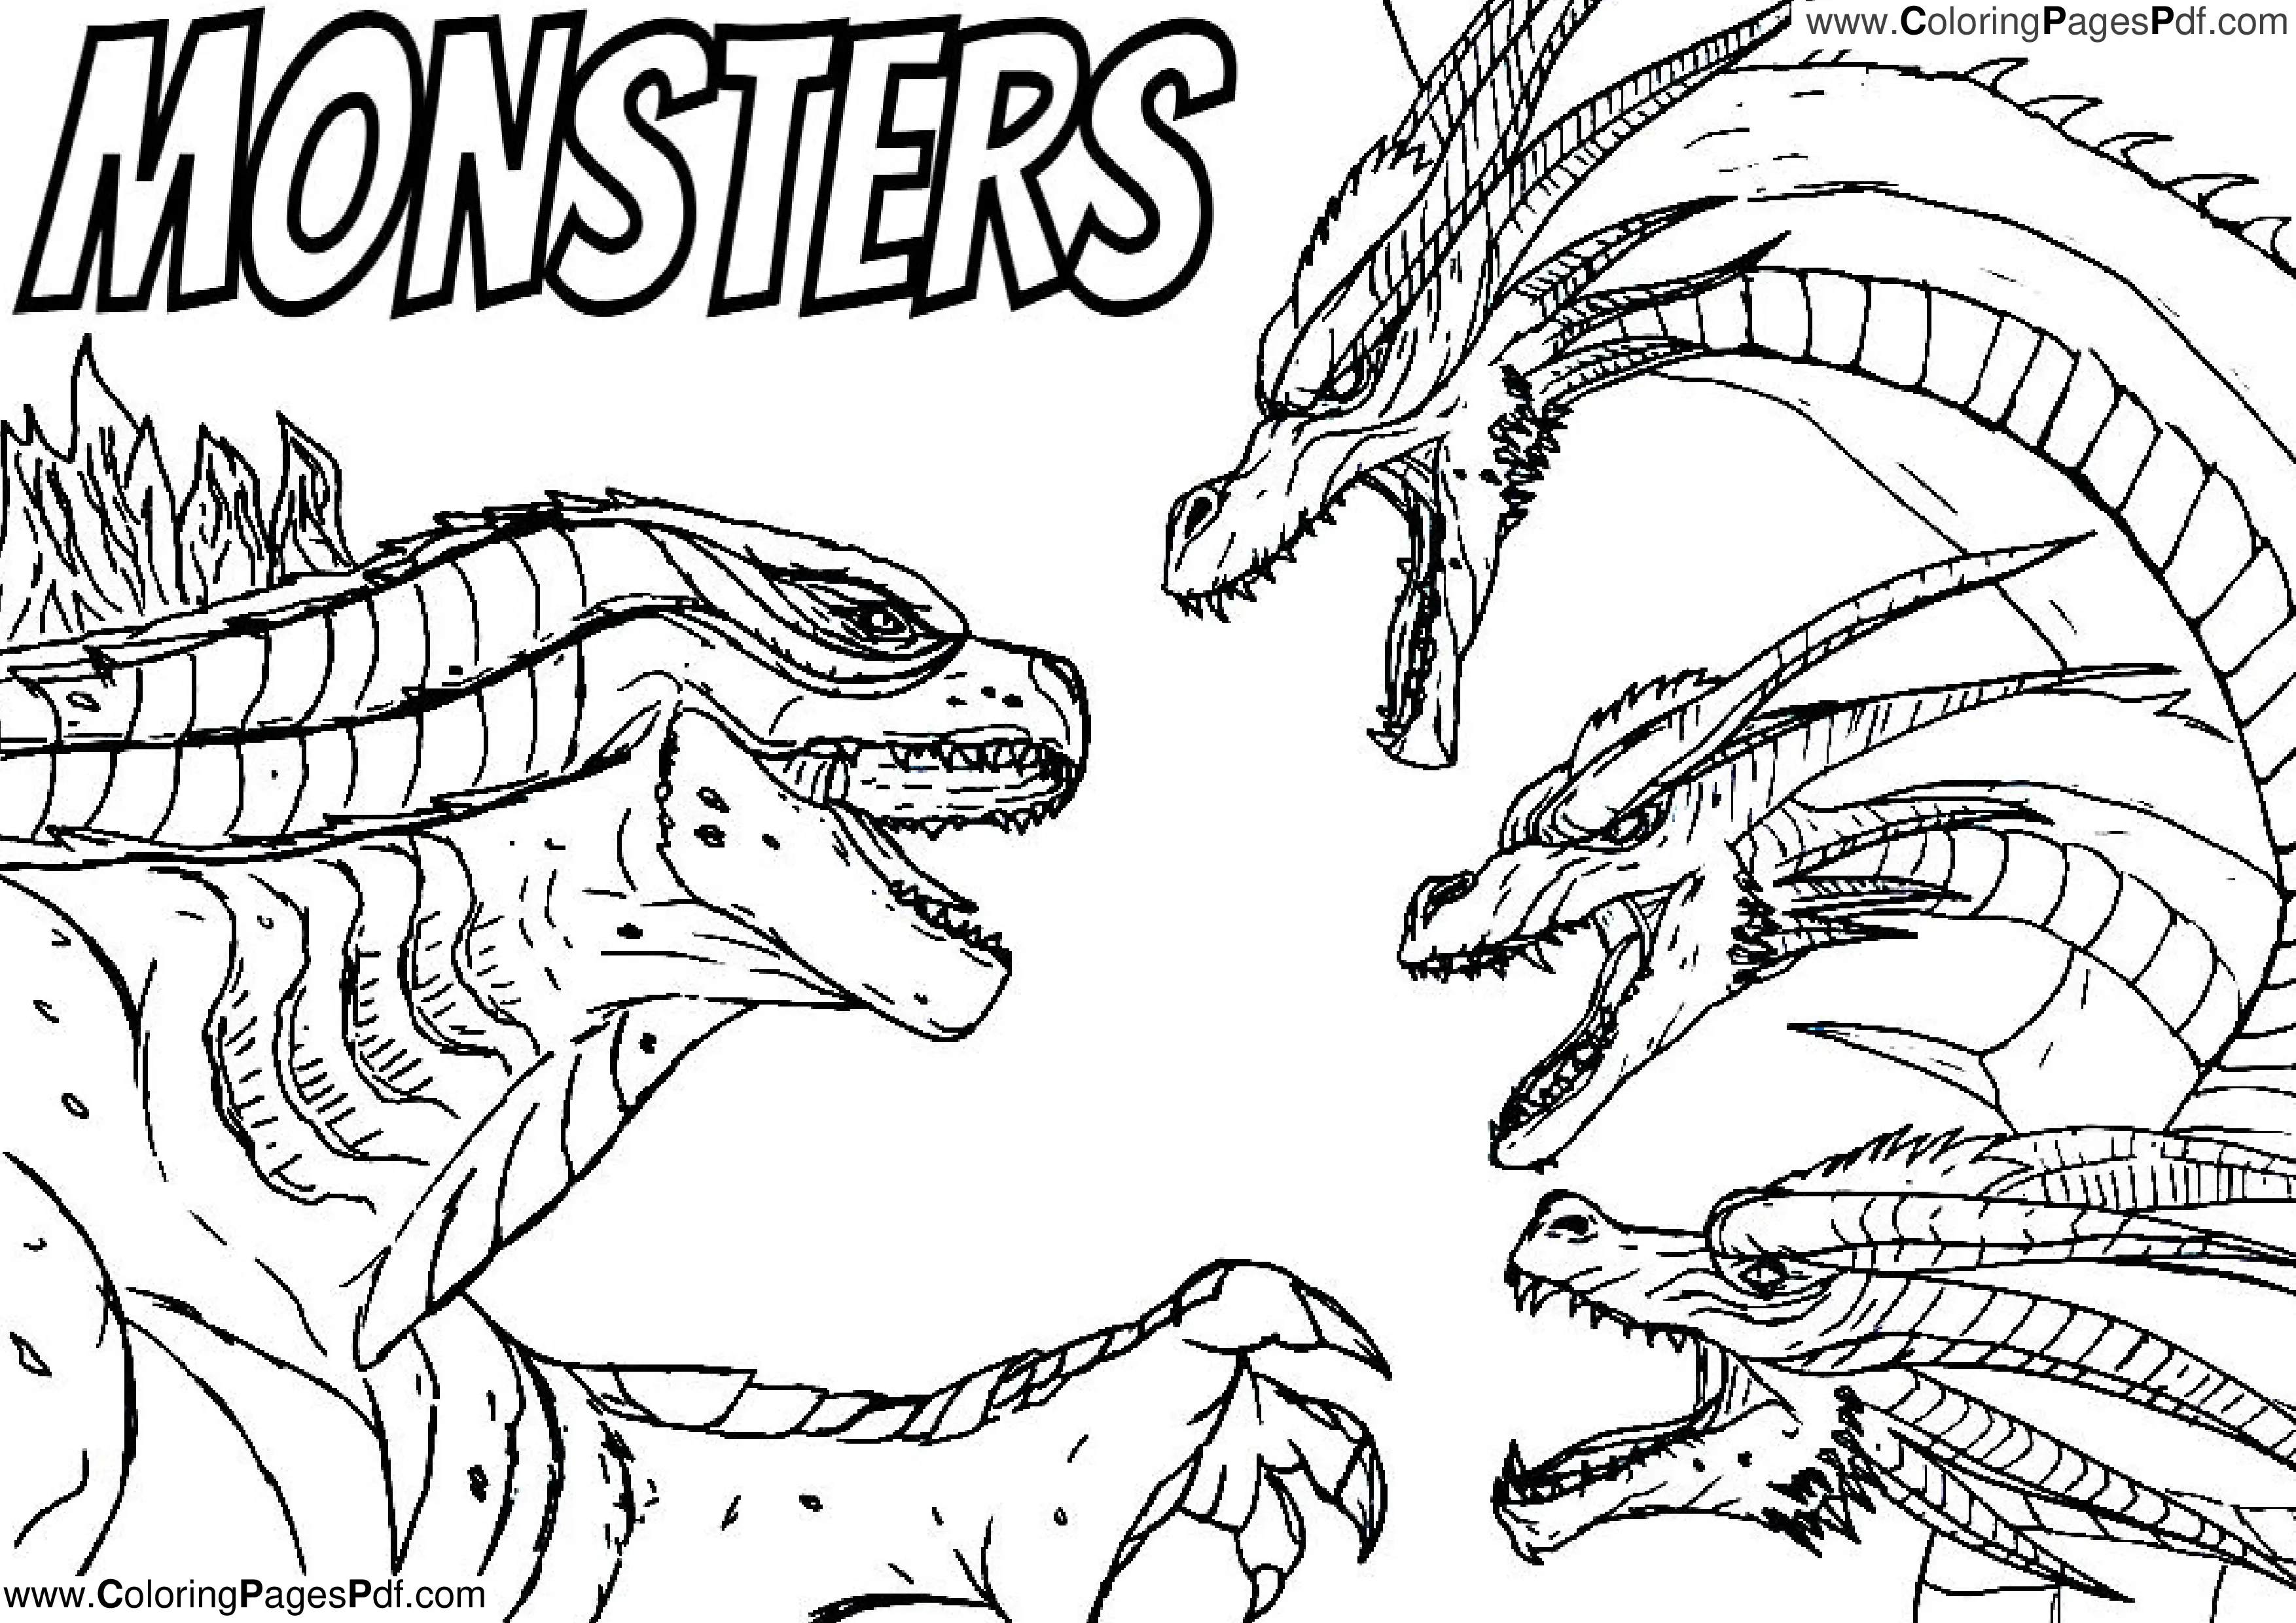 Realistic monster coloring pages